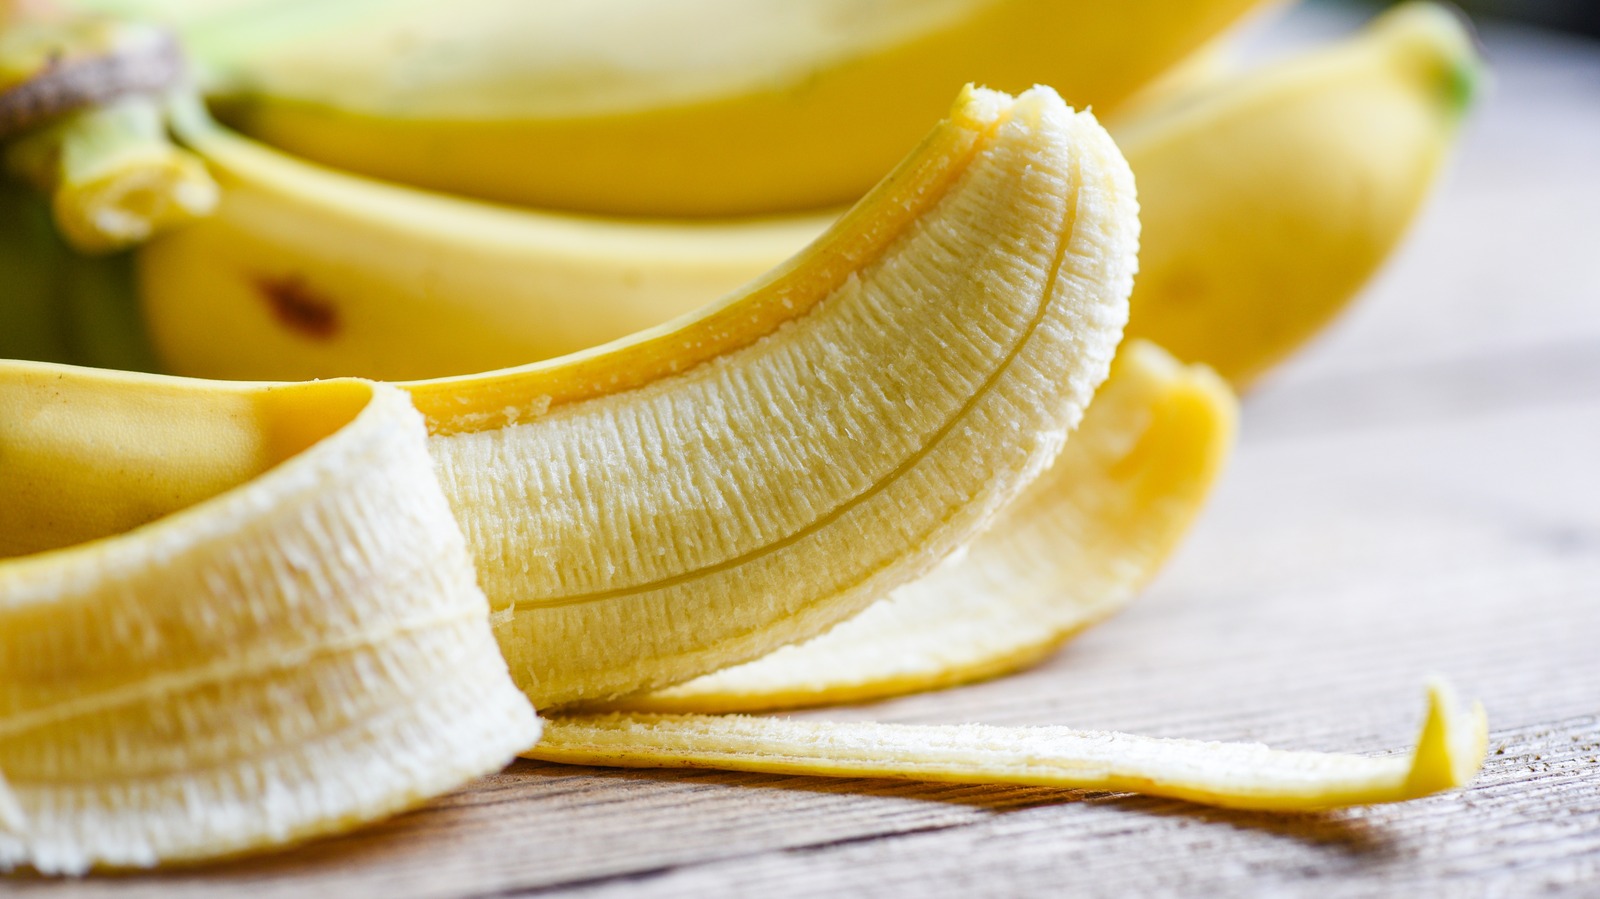 The Banana You're Likely Familiar With Could Extinct. Here's Why